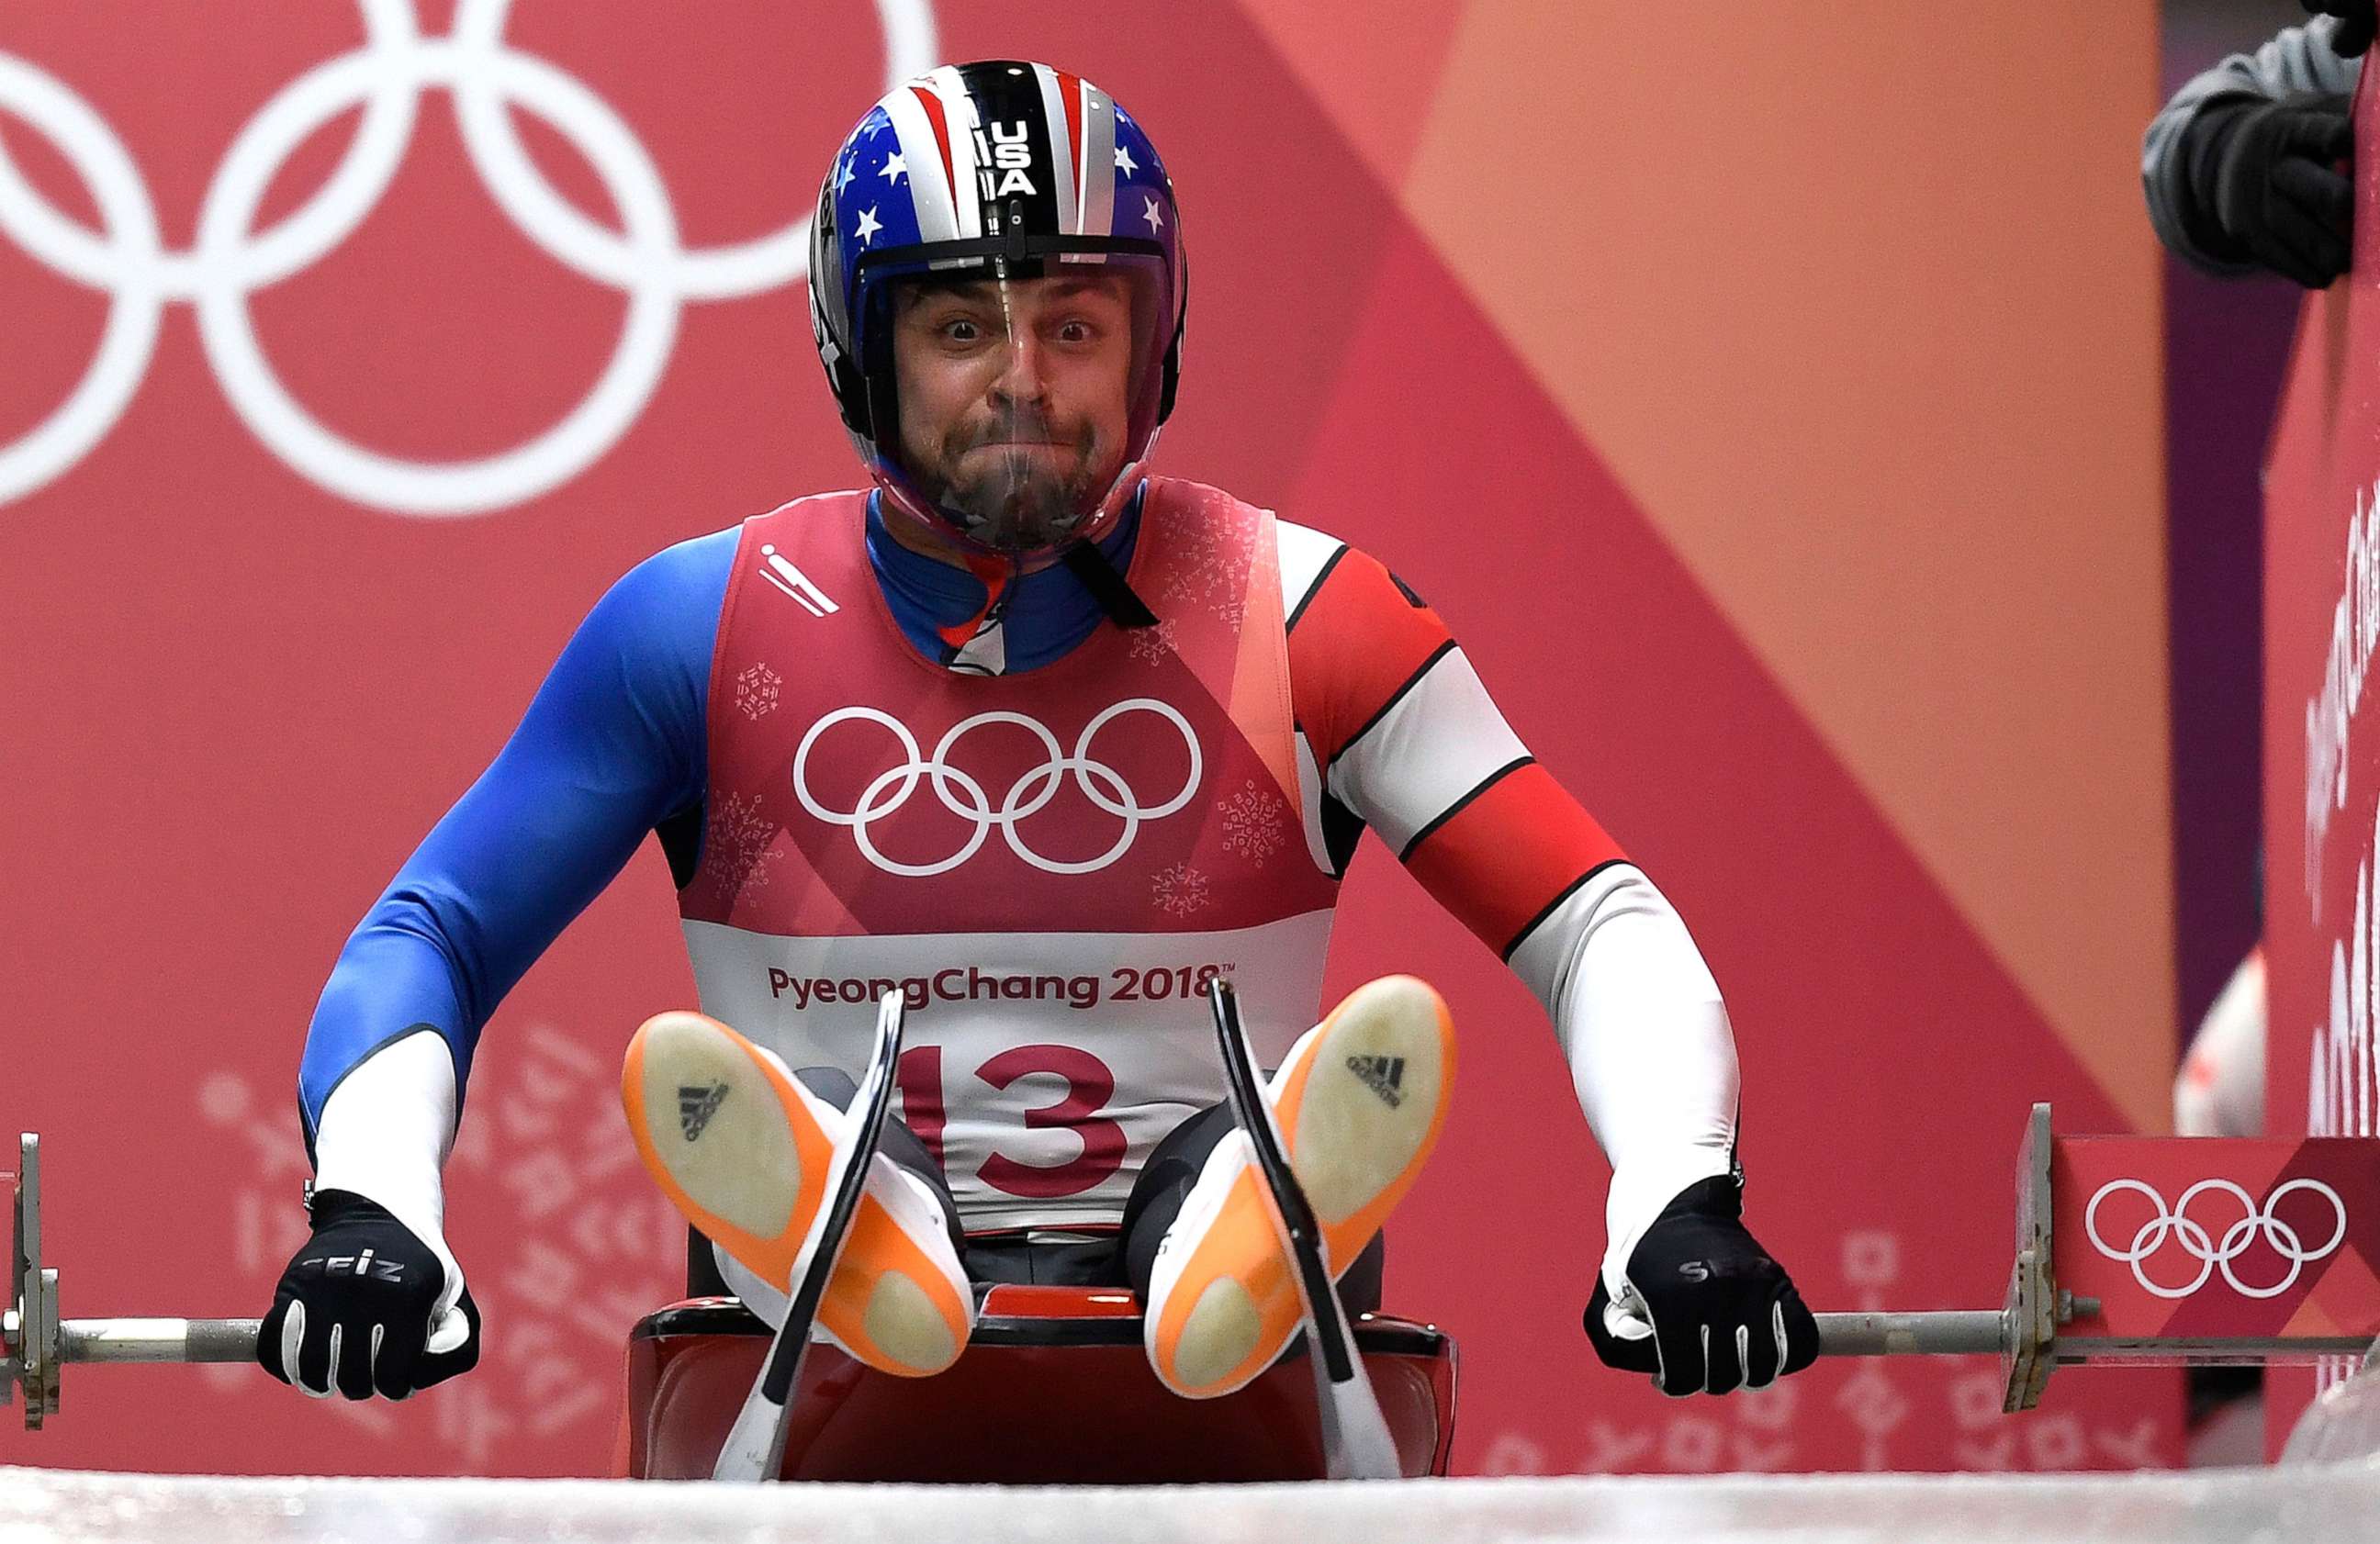 PHOTO: Chris Mazdzer of the U.S. at the start during the men's luge singles competition at the Olympic Sliding Centre during the PyeongChang 2018 Olympic Games, South Korea, Feb. 11, 2018.